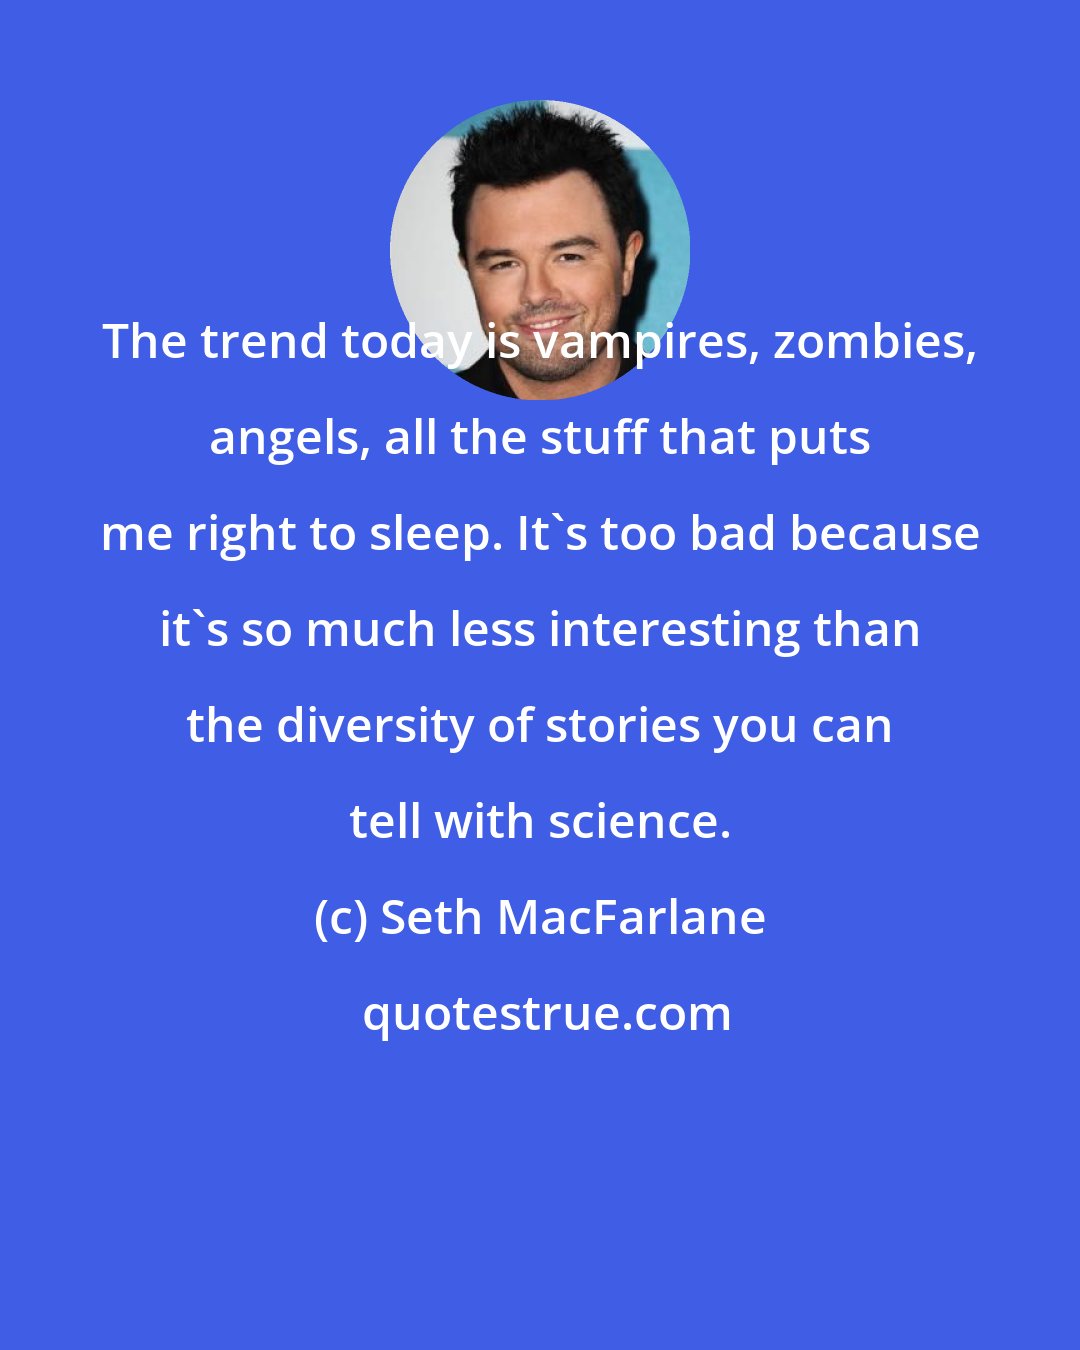 Seth MacFarlane: The trend today is vampires, zombies, angels, all the stuff that puts me right to sleep. It's too bad because it's so much less interesting than the diversity of stories you can tell with science.